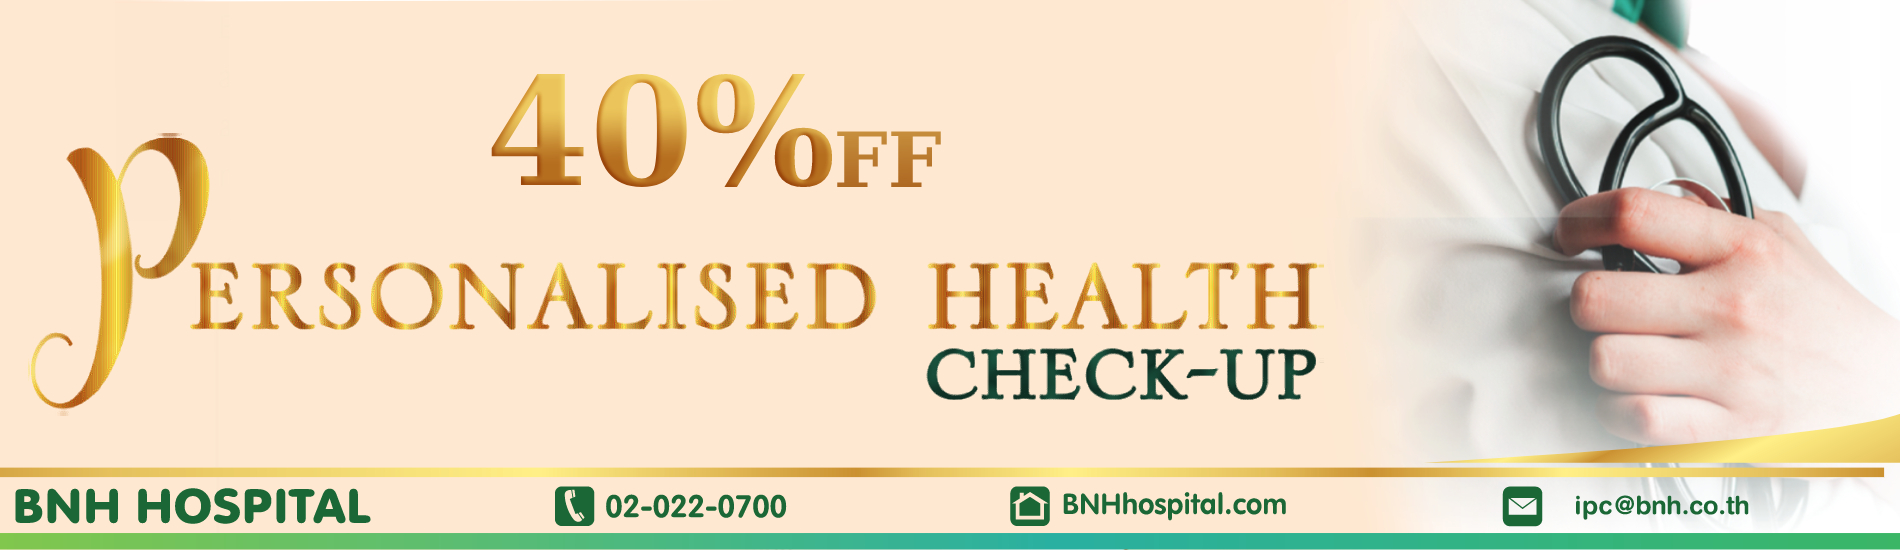 Special Privilege 40% Discount Check-up at BNH Hospital